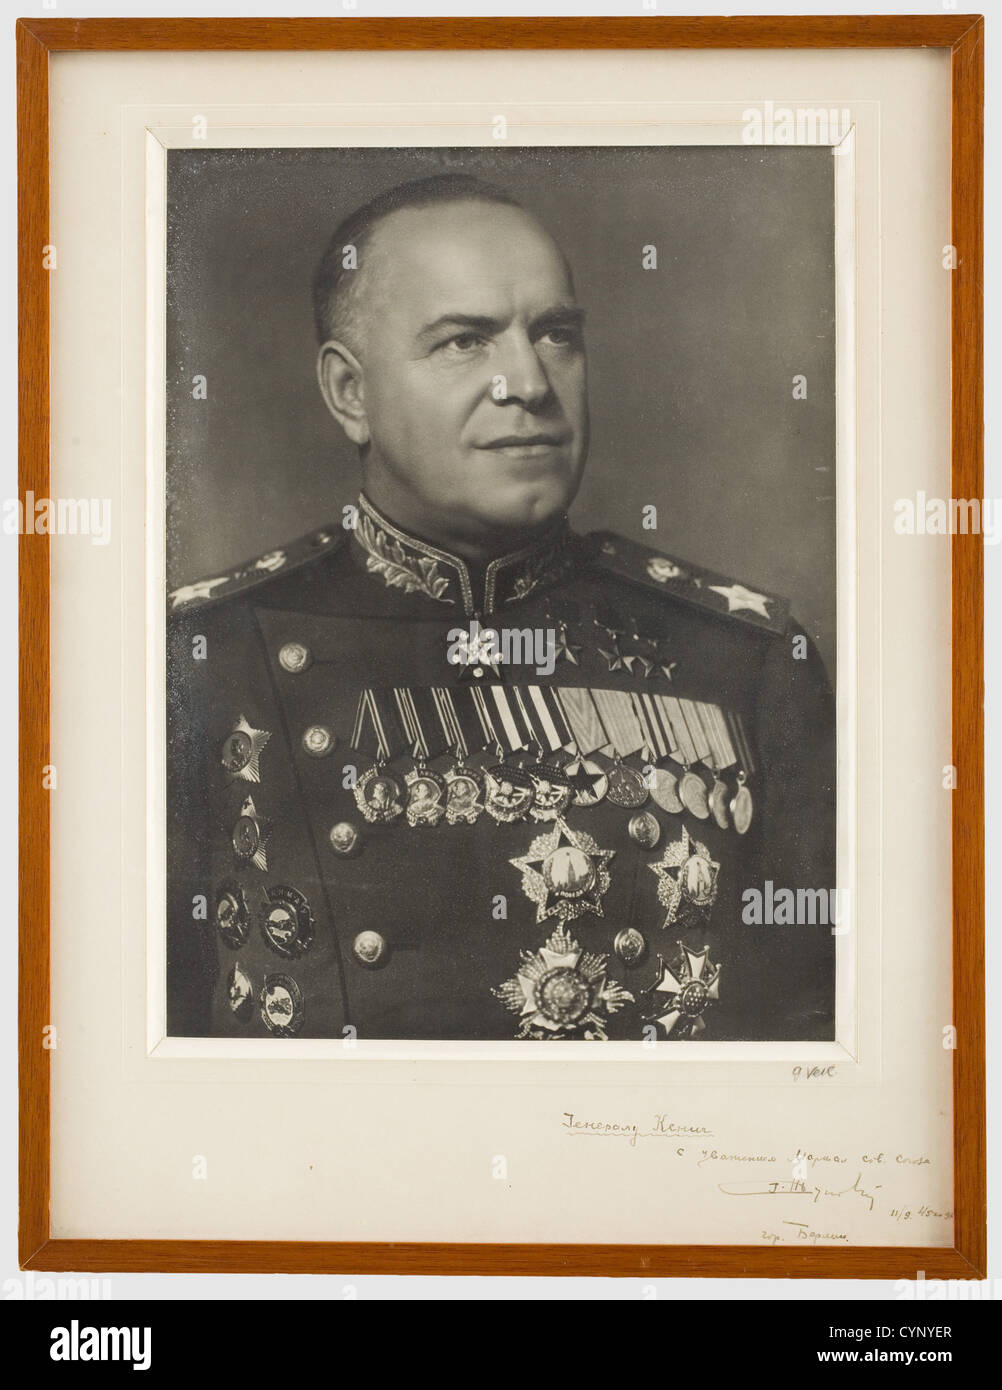 Marshal Georgy Konstantinovich Zhukov (1896 - 1974) - a photo with dedication to General Koenig, Portrait picture in marshal's uniform with numerous medals. The mount with a Cyrillic dedication handwritten in dark ink "To the French General Koenig, respectfully Marshal Zhukov, City of Berlin 11/09/45". On the lower right the photographer's signature "G. Veil". Framed and under glass, dimensions 55 x 42 cm. Marshal Zhukov was head of the general staff and Soviet secretary of defence. He became known for successfully defending Moscow and emerging victorious in th, Stock Photo